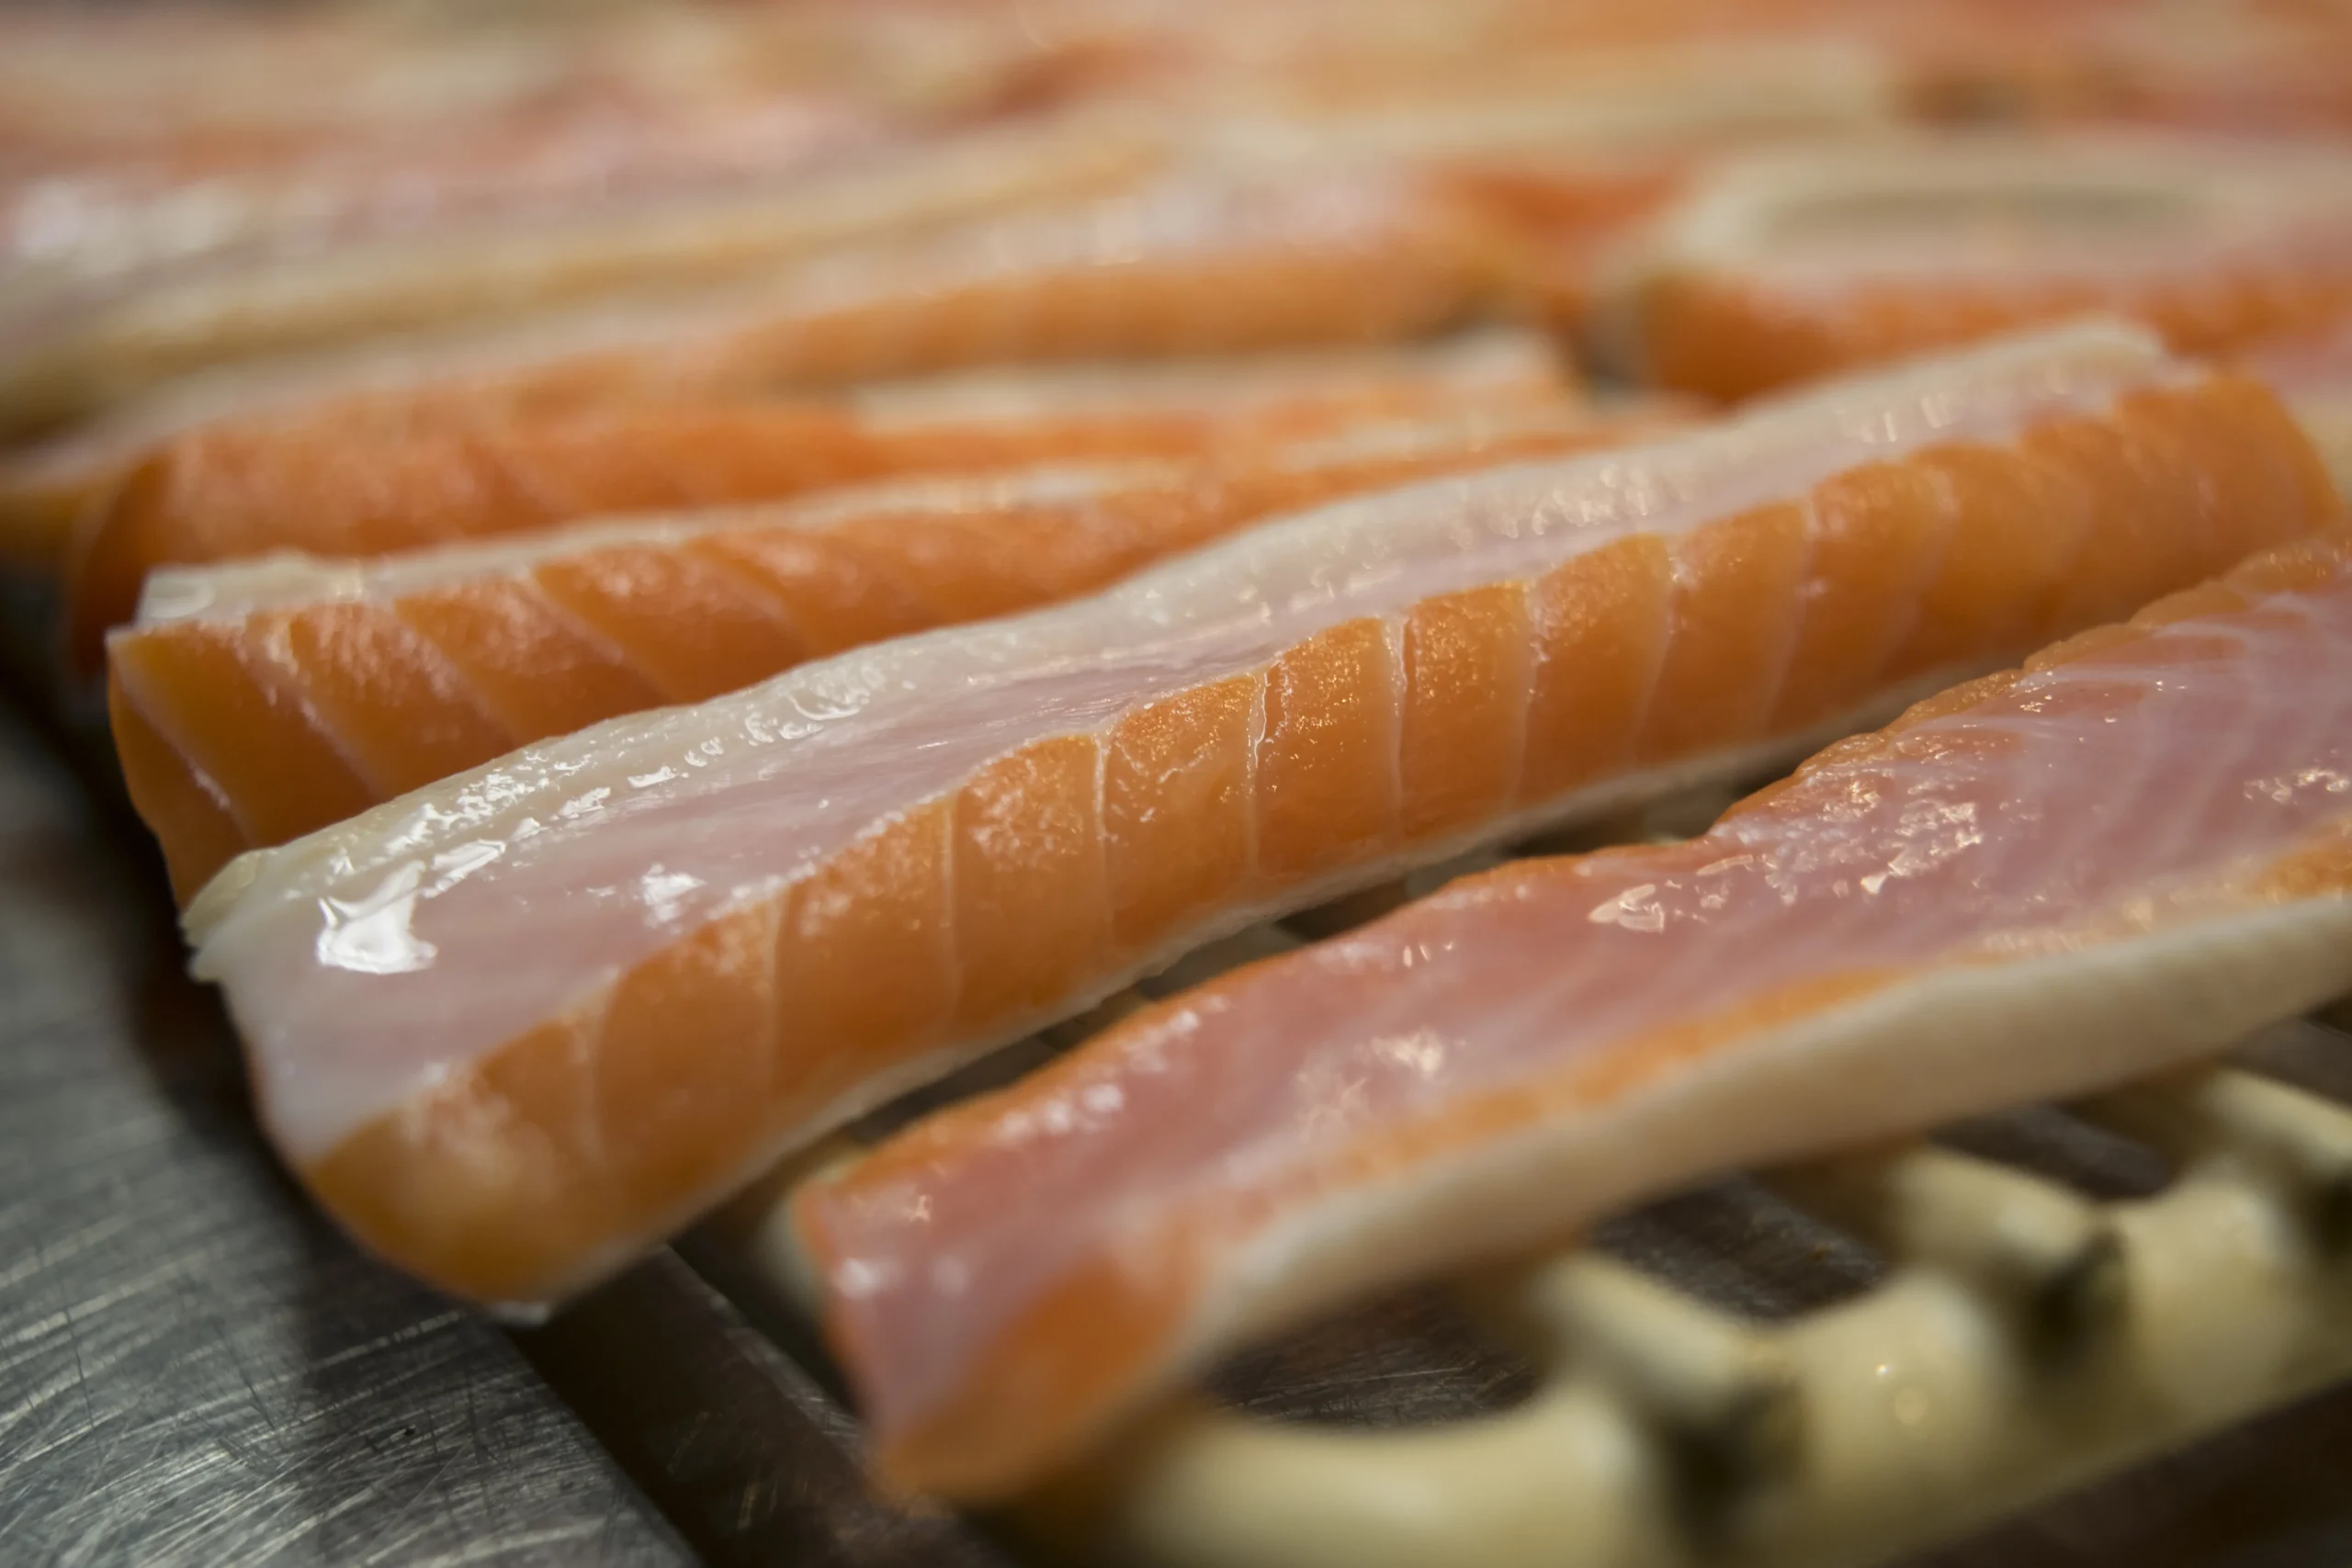 smoked salmon belly strips - Is smoked salmon belly good